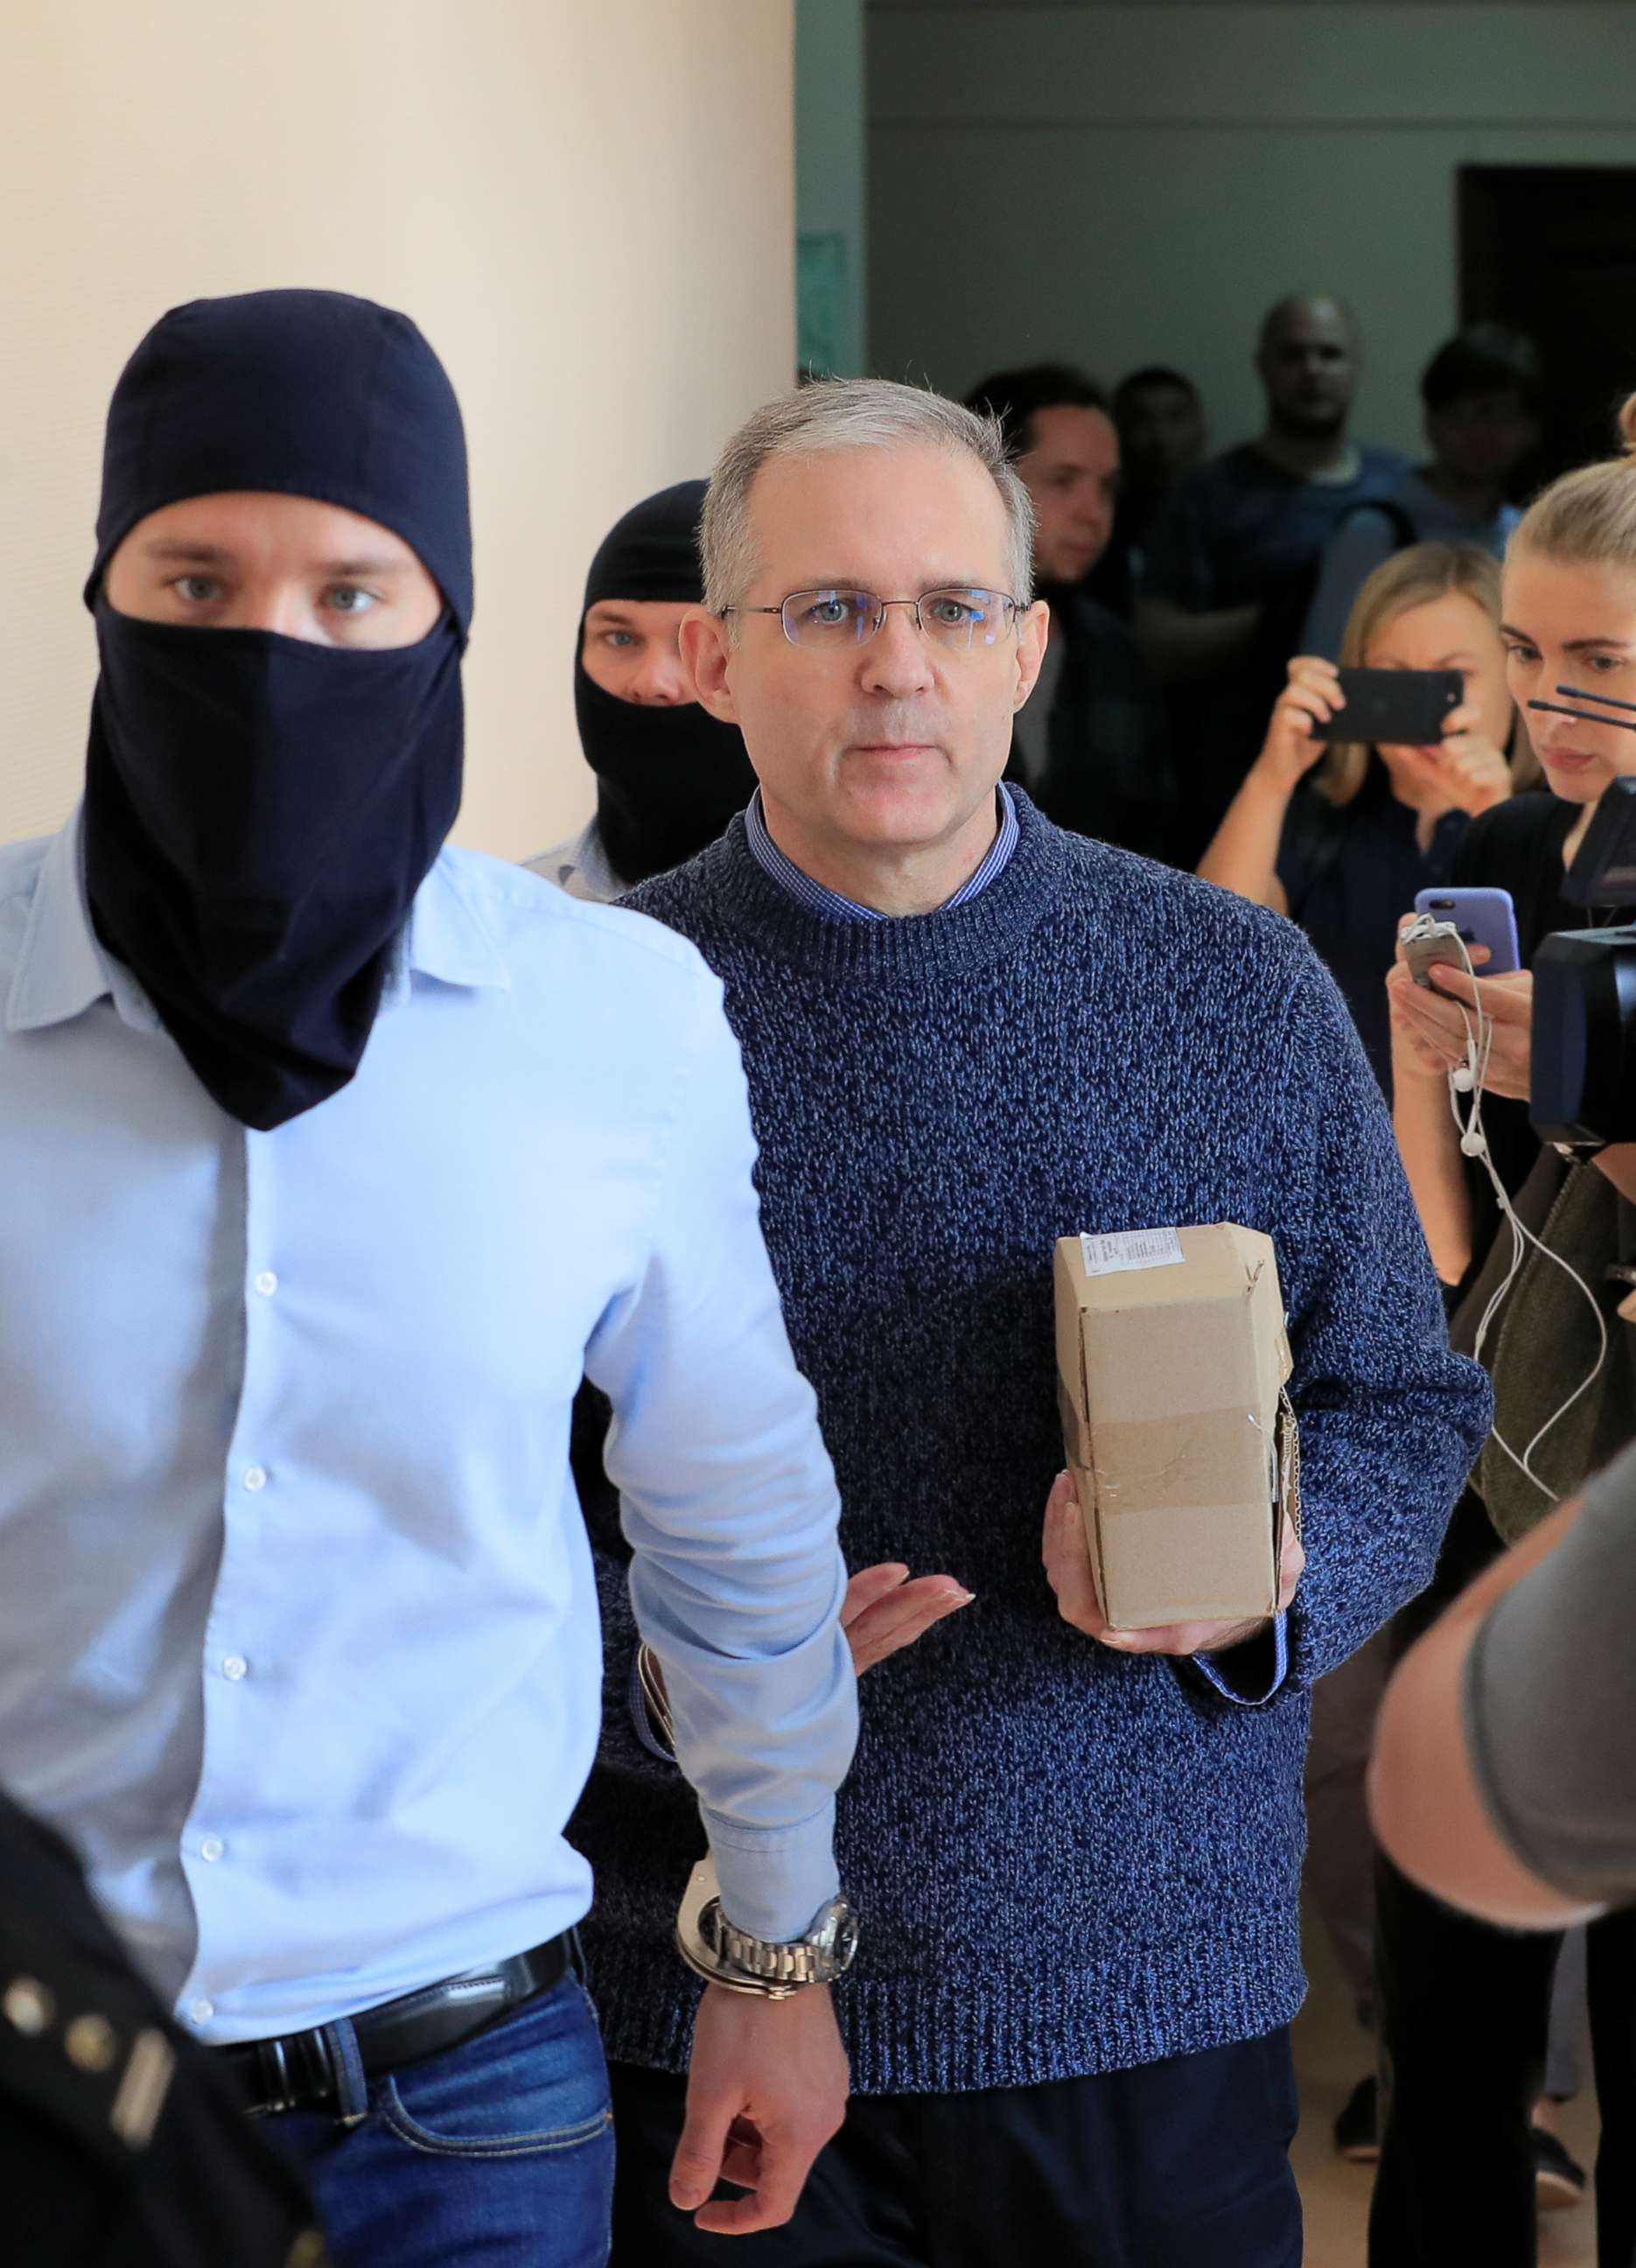 PHOTO: Paul Whelan is escorted inside a court building in Moscow, Aug. 23, 2019.